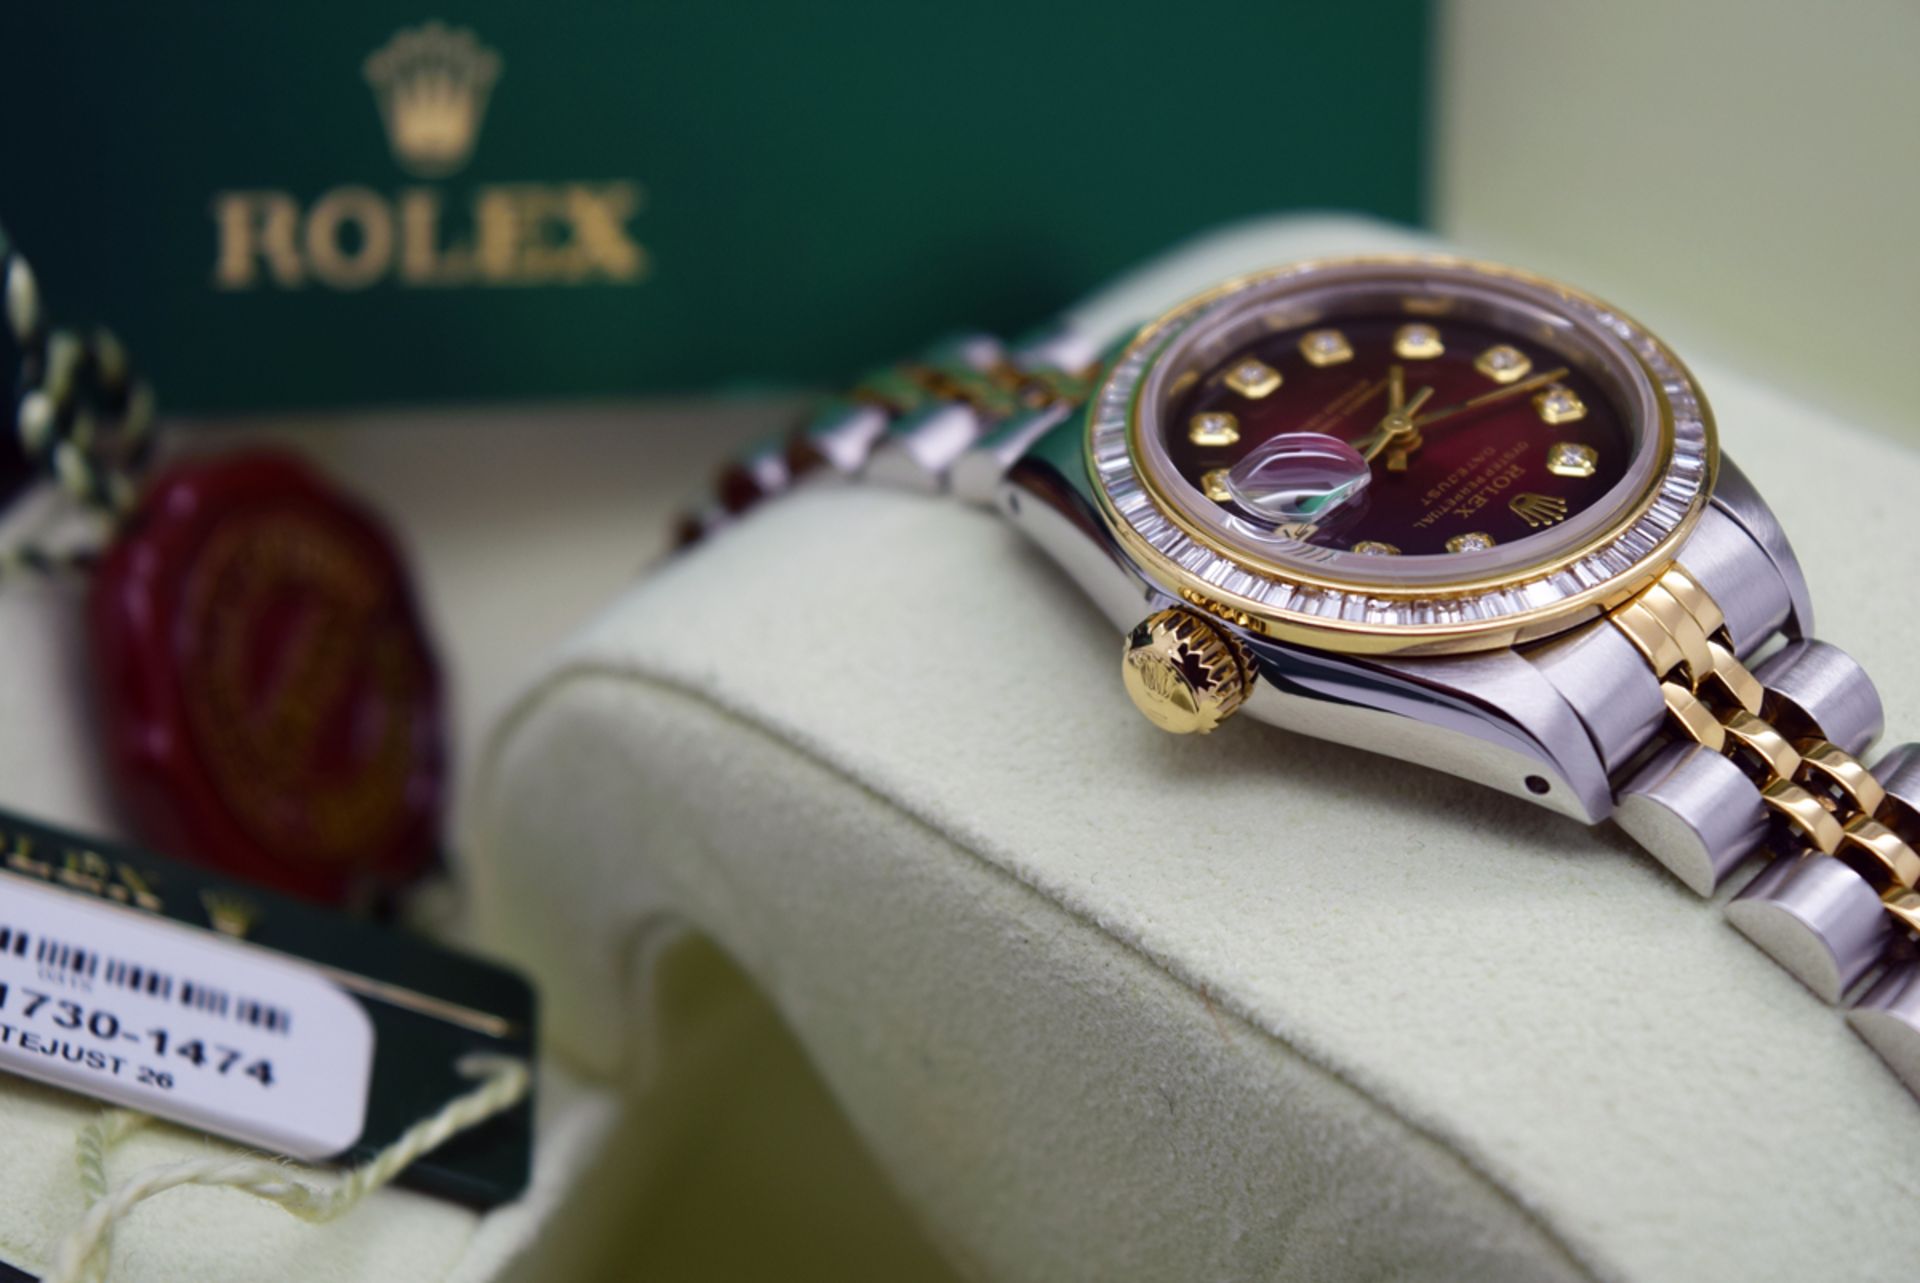 *STUNNING* ROLEX DATEJUST 18K GOLD & STAINLESS STEEL - BAGUETTE DIAMOND BEZEL AND DIAMOND DIAL - Image 10 of 11